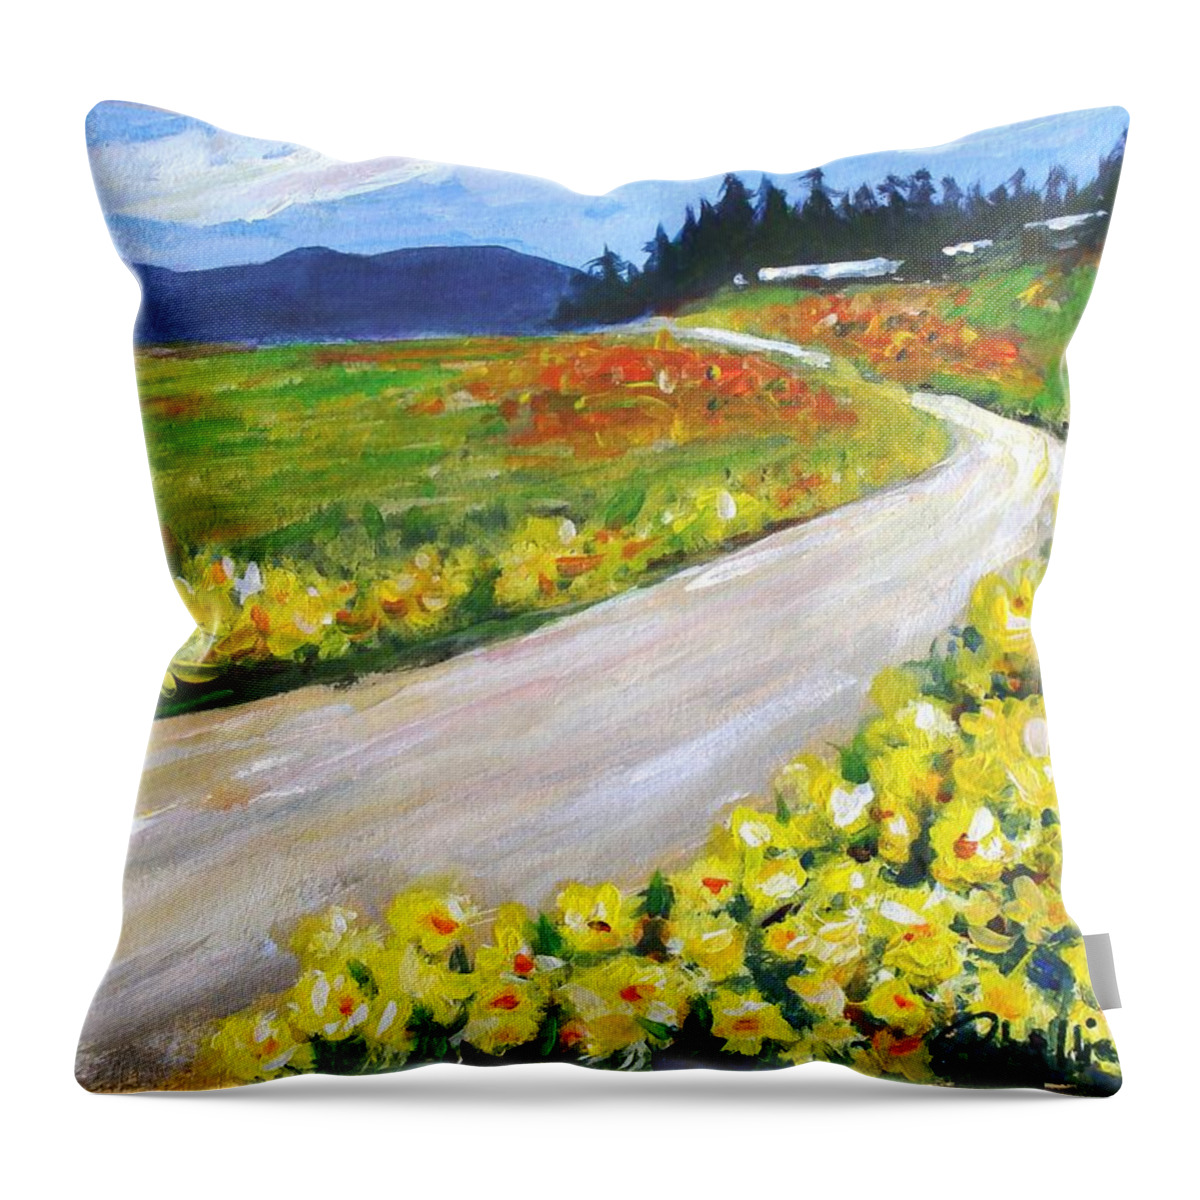 Padilla Throw Pillow featuring the painting Padilla Trail by Phyllis Howard